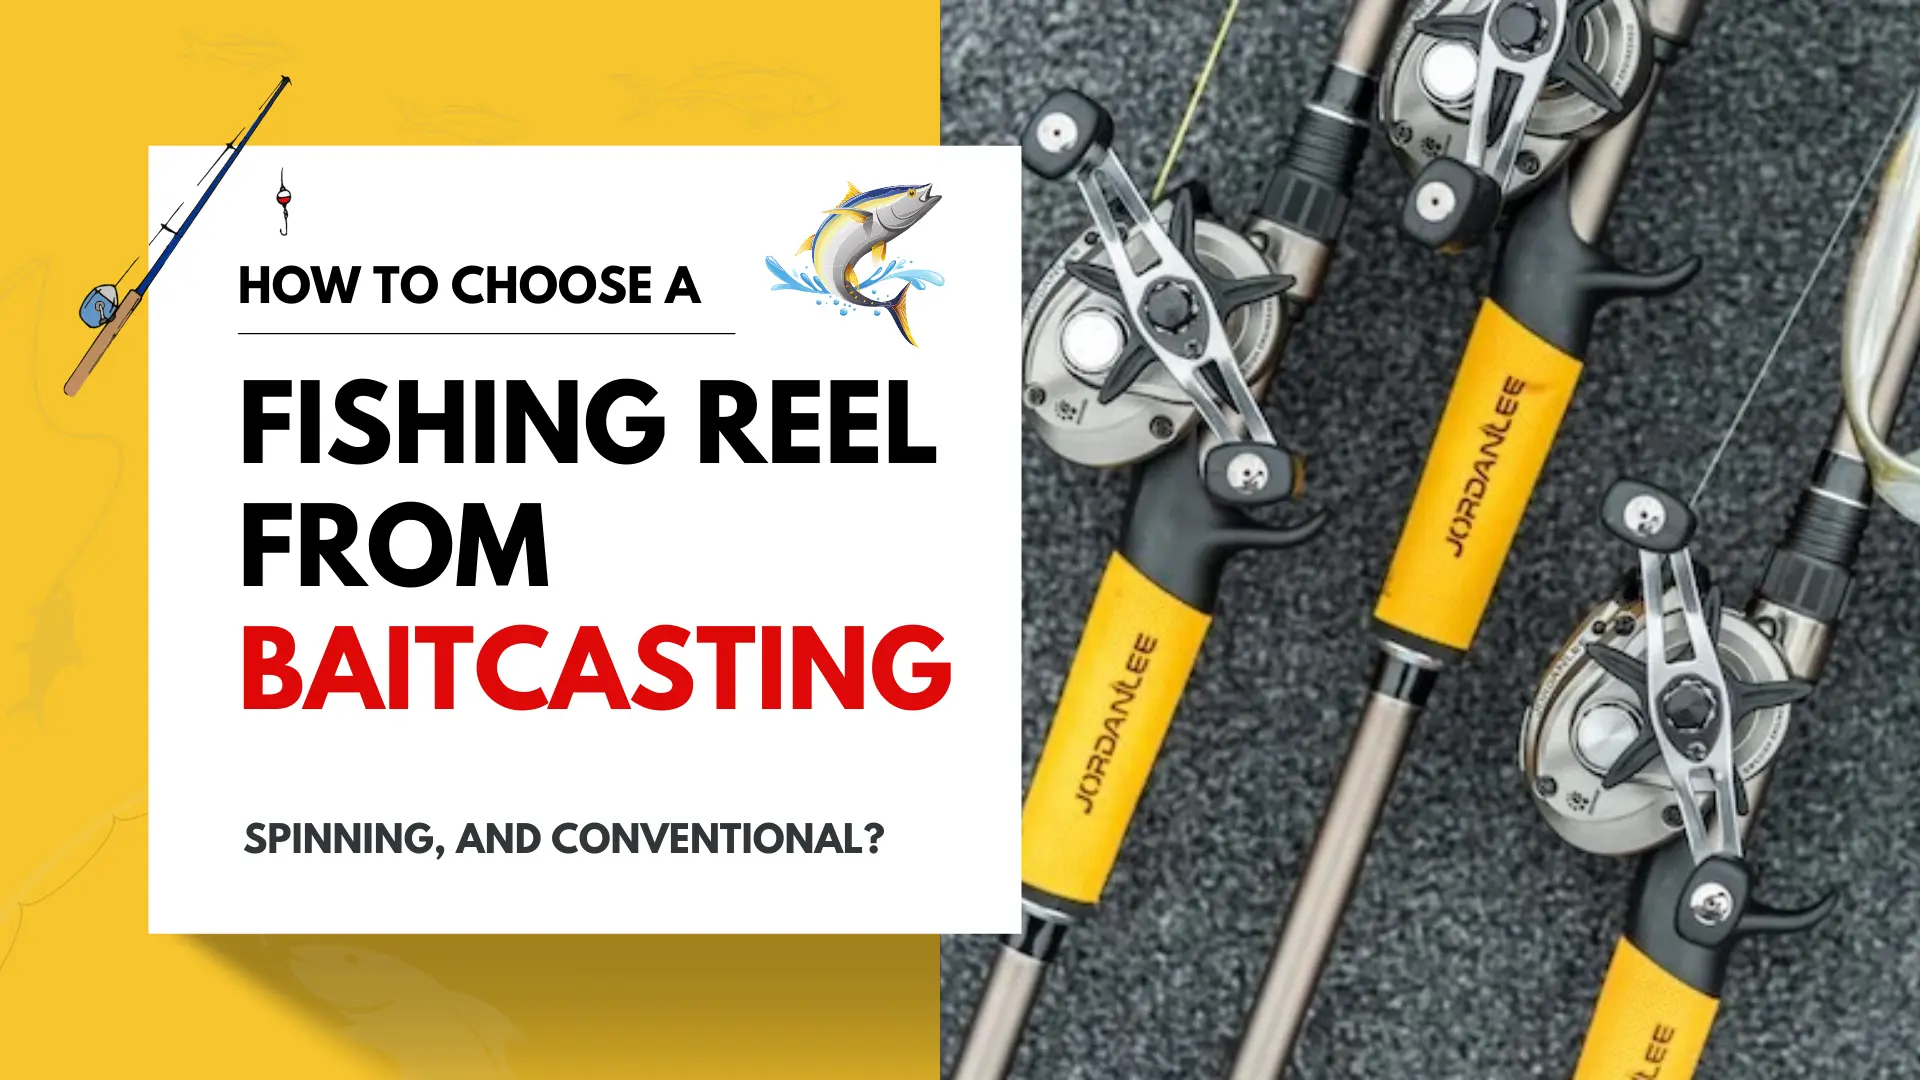 How to choosea a fishing reel from baitcasting, spinning, and conventional